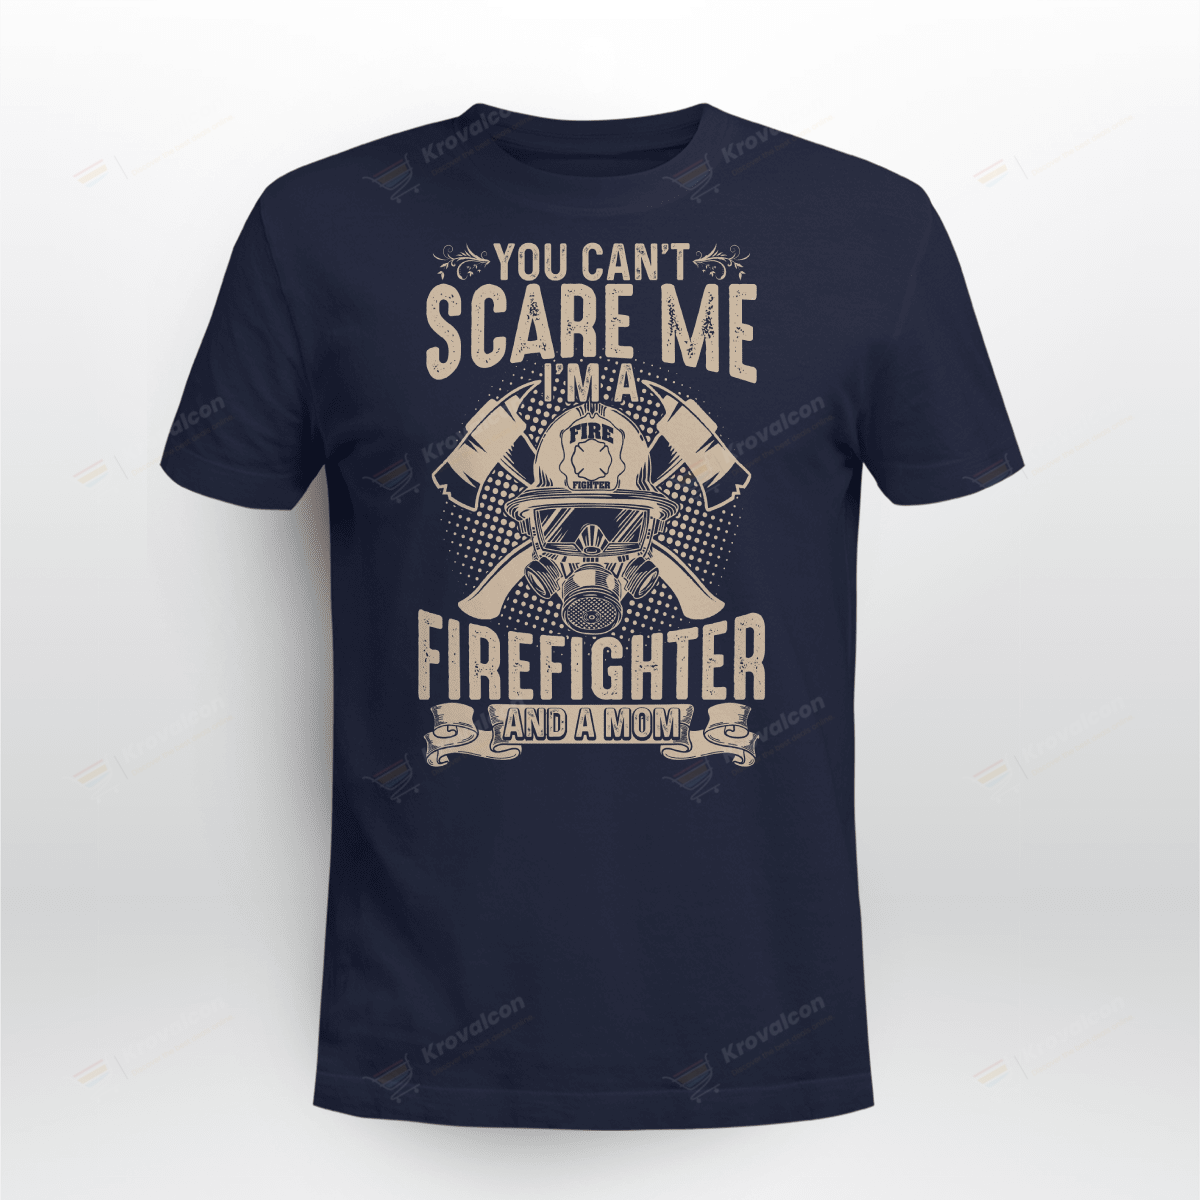 YOU CAN'T SCARE ME I'M A FIREFIGHTER AND A MOM